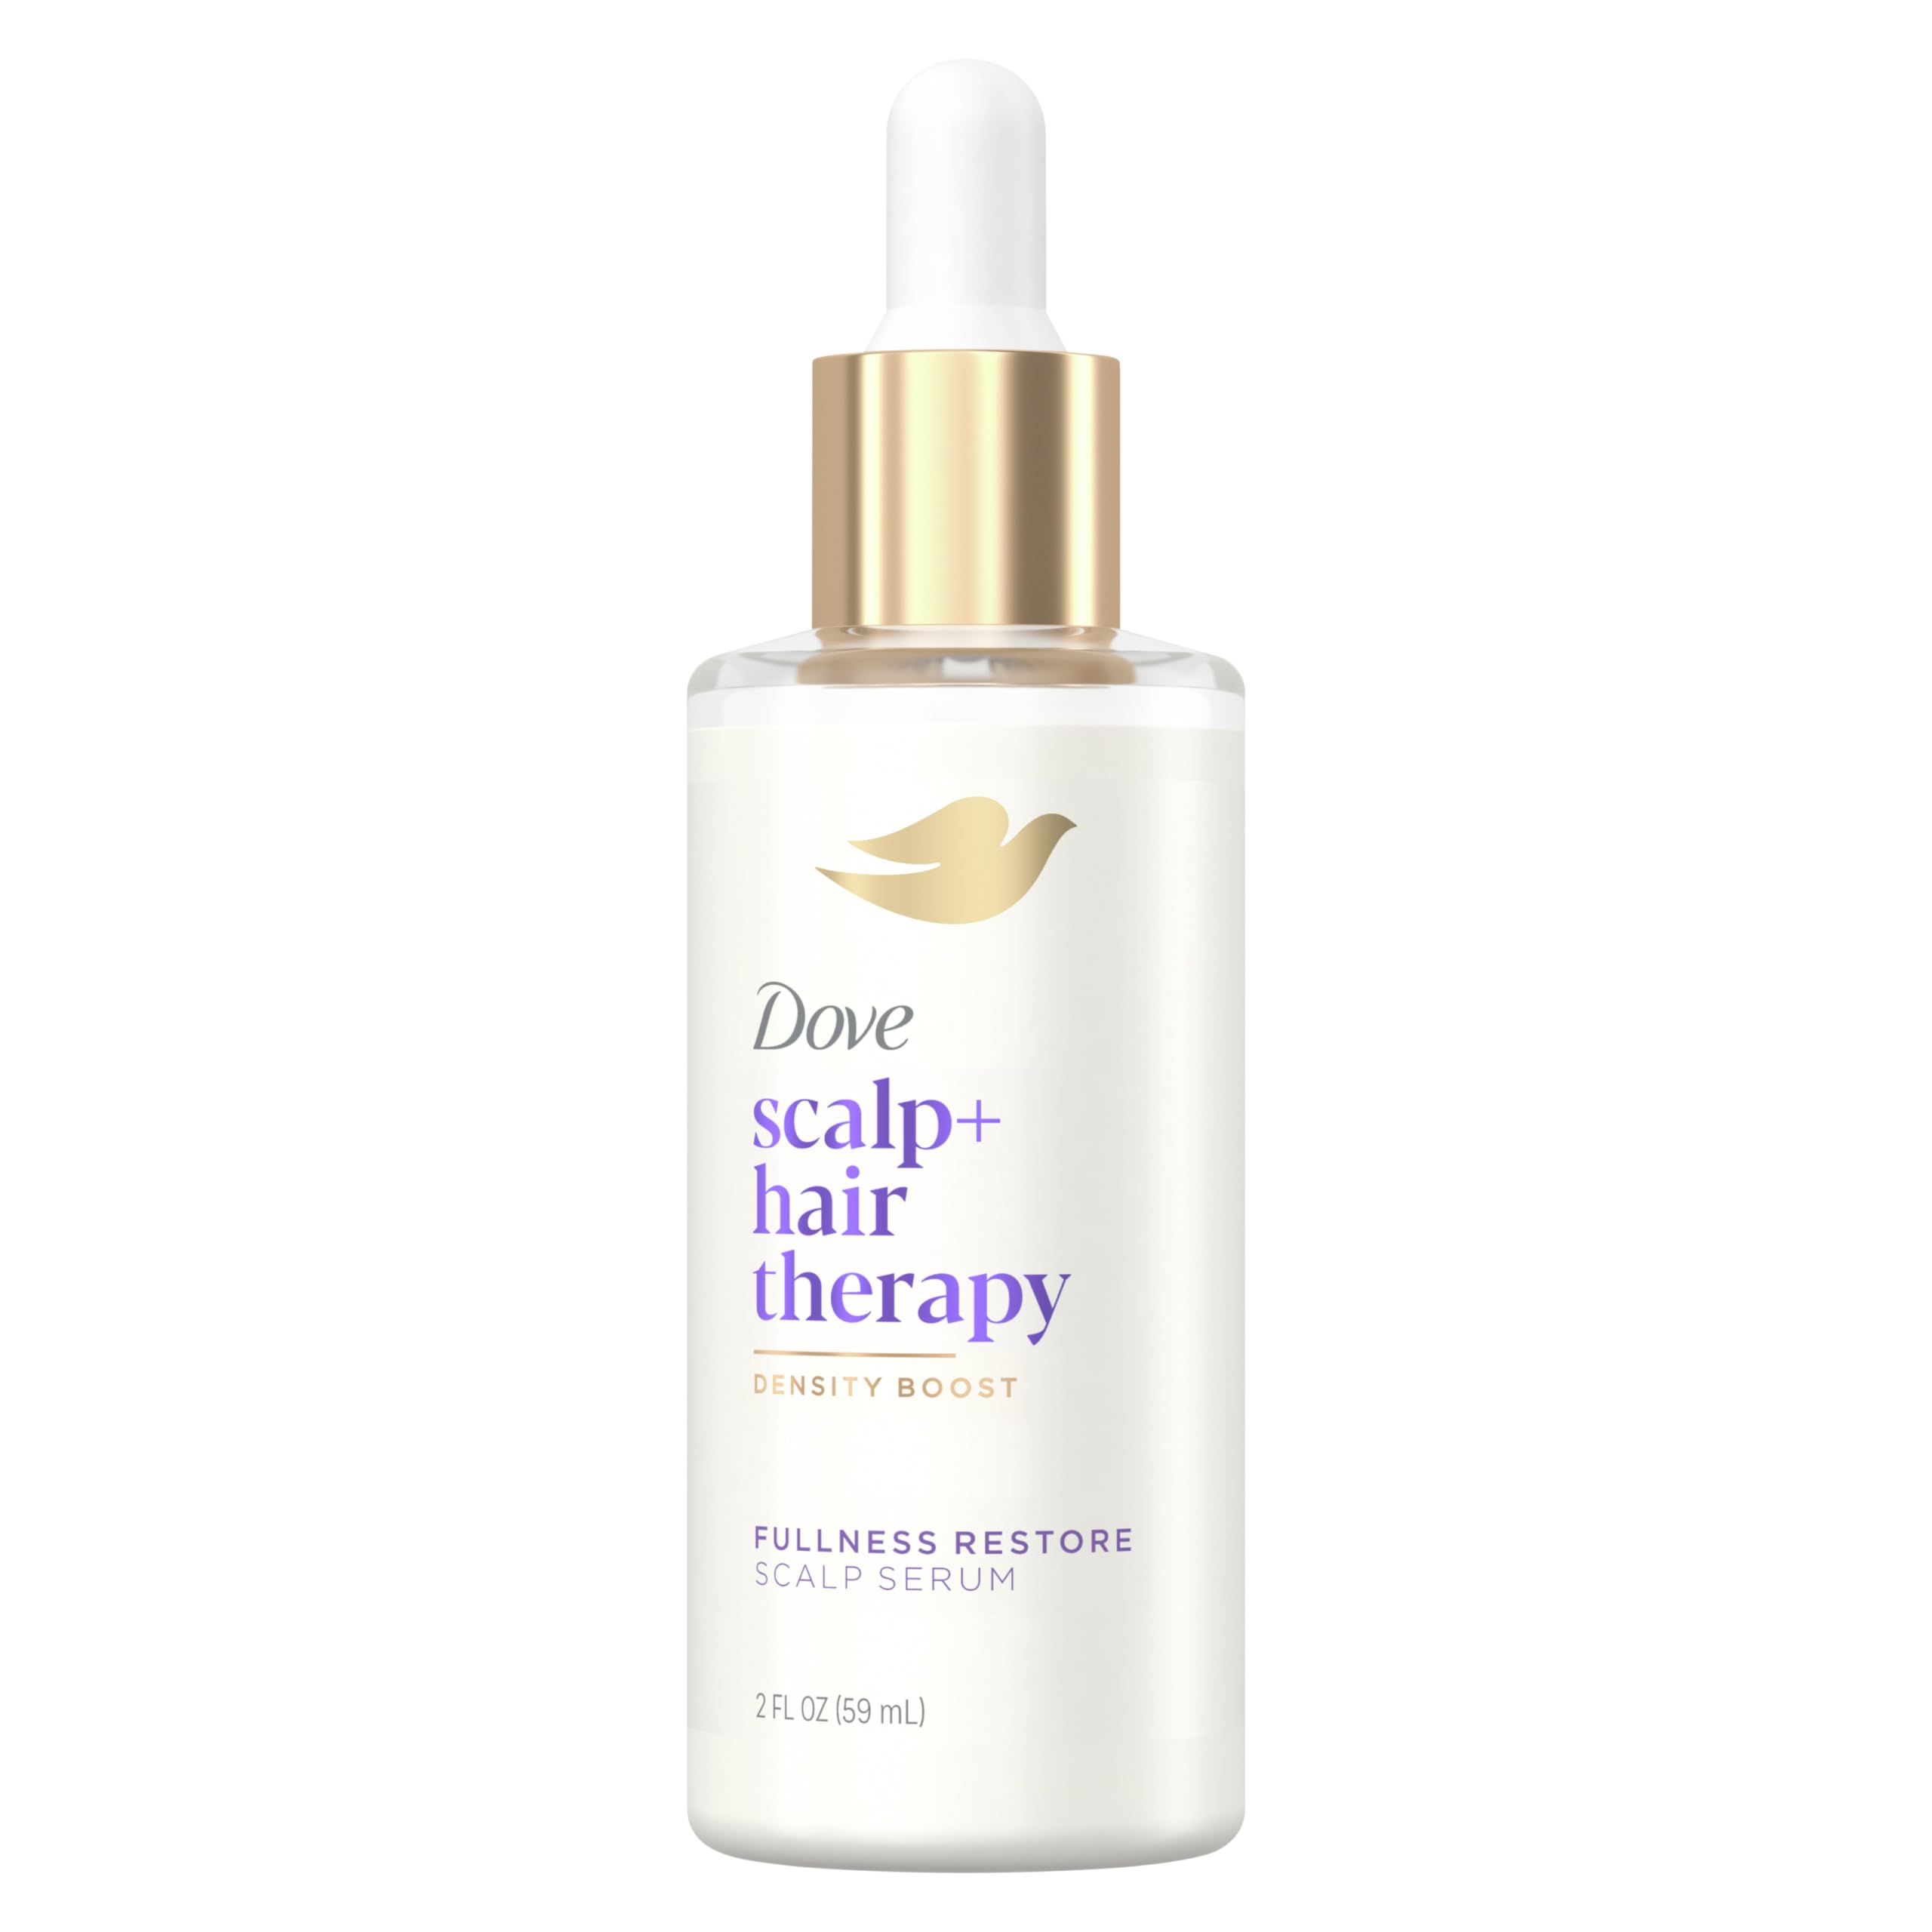 Dove Scalp + Hair Therapy Hair Serum Density Boost Fullness Restore Scalp Serum for thicker hair scalp moisturizing formula fortifies roots and boosts visible hair density 2 FL OZ (59mL)